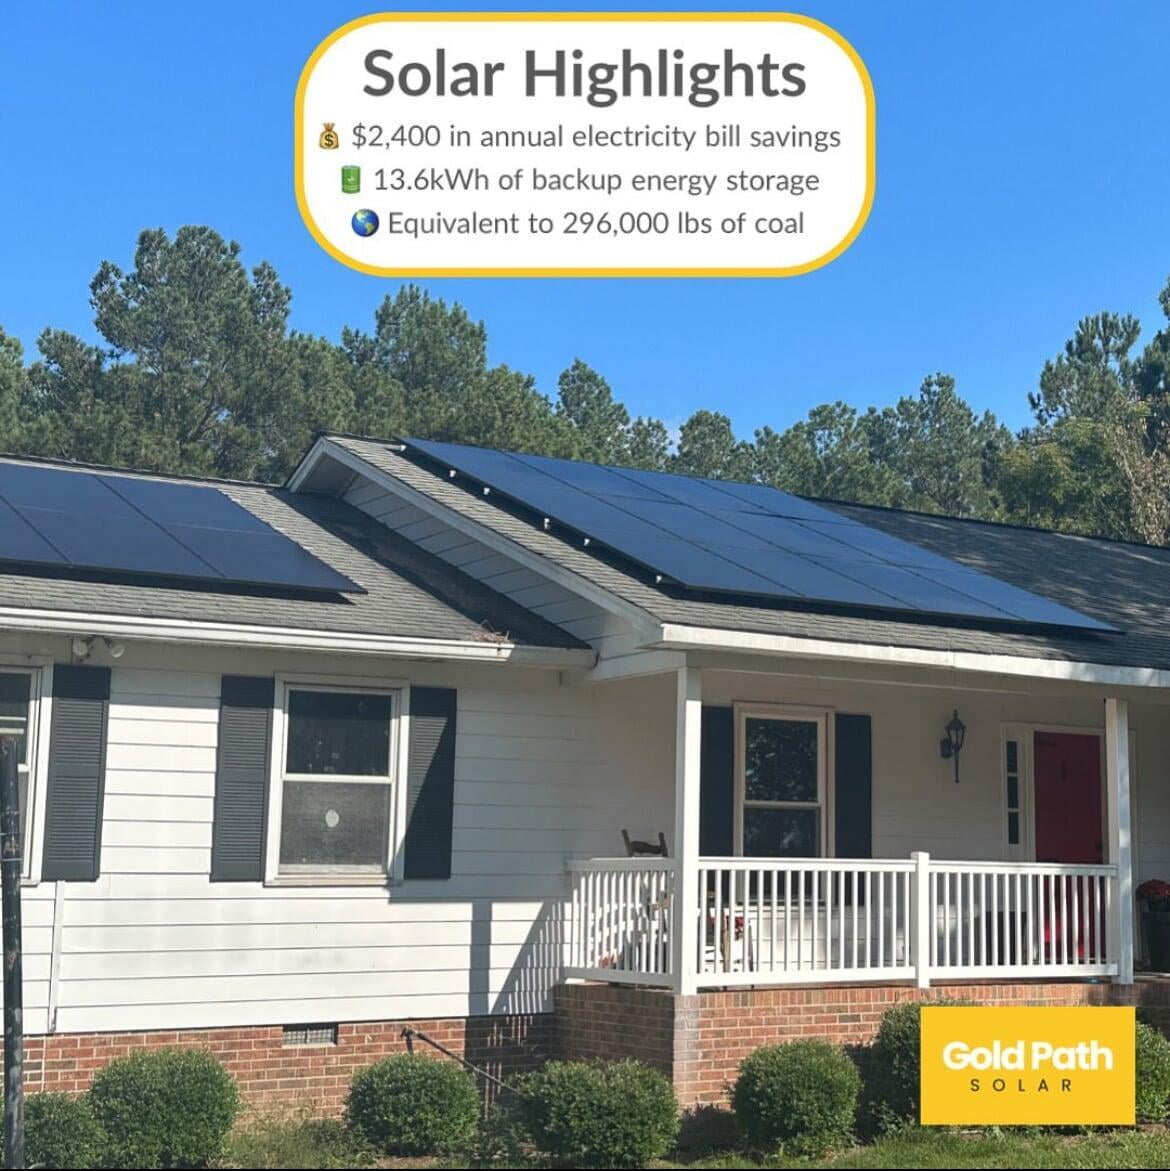 How Does Gold Path Solar Offer the Best Value?